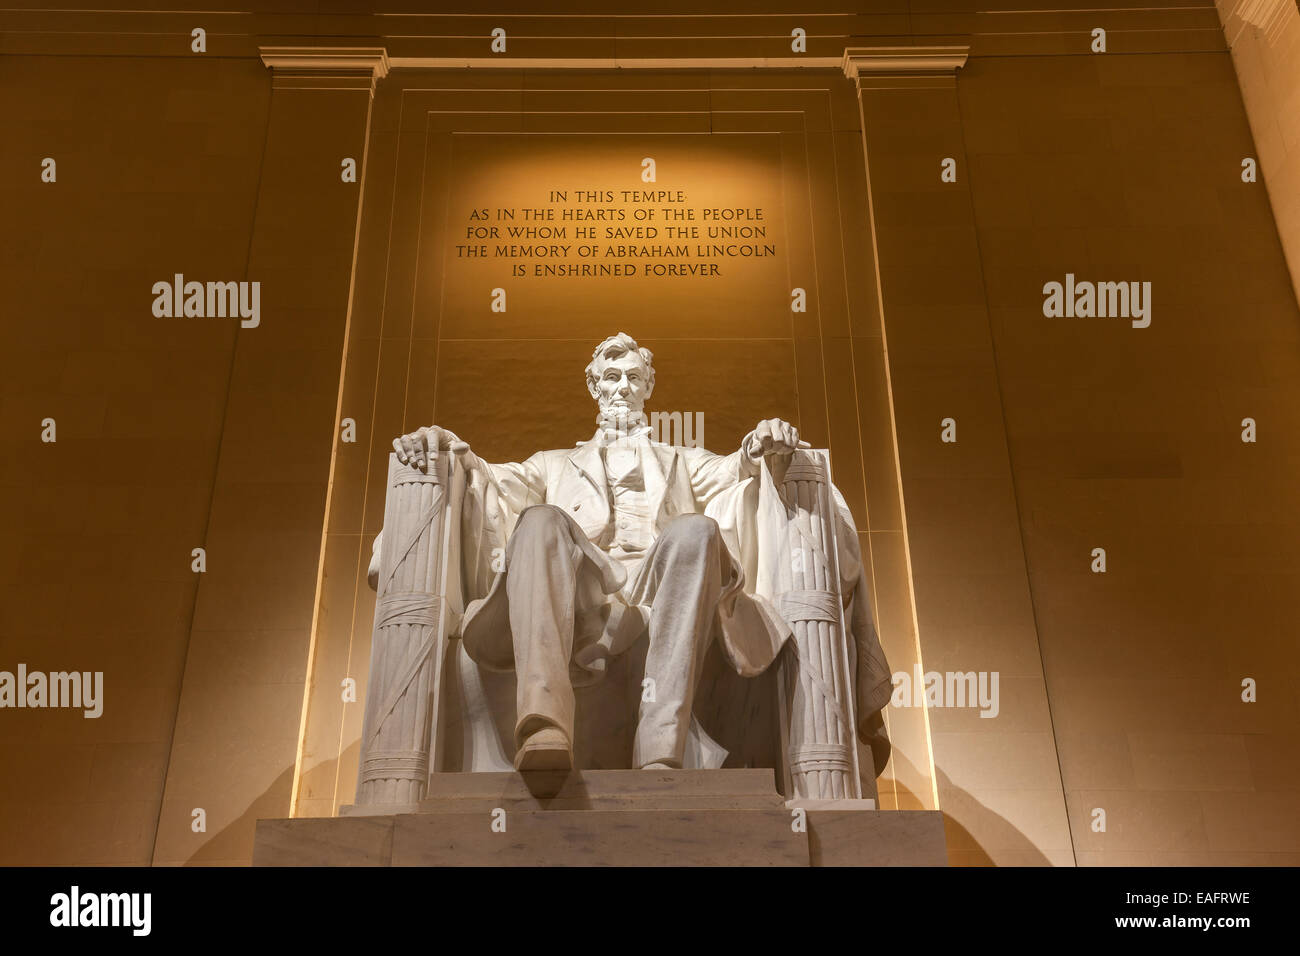 The Lincoln Memorial is an American national monument built to honor the 16th President of the United States, Abraham Lincoln. Stock Photo